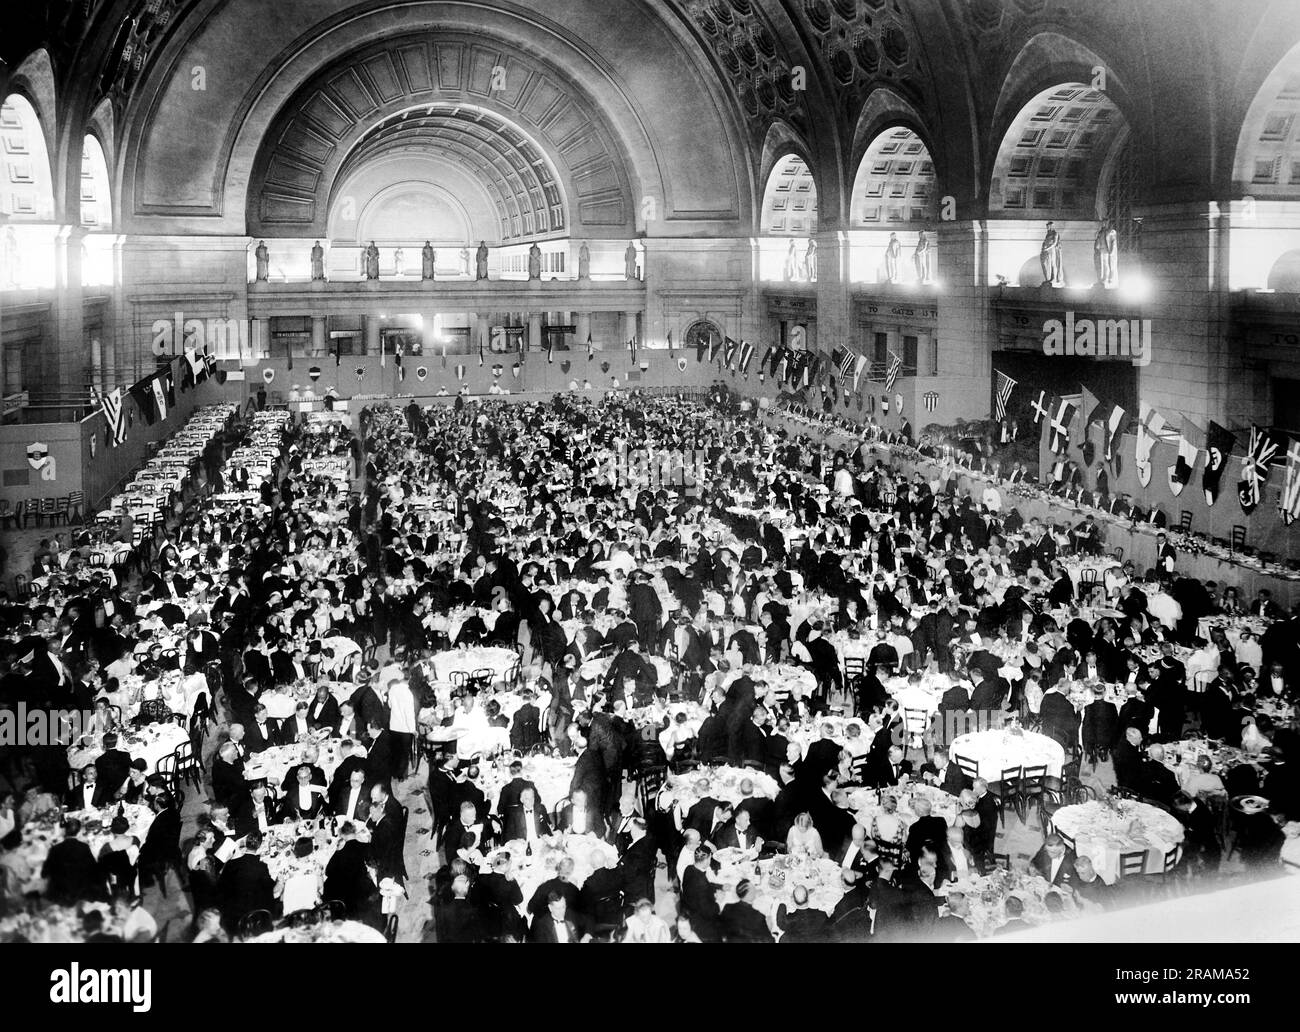 Washington, D.C.:  c. 1933. Nearly two thousand people are dining here in the Hall of Transportation at Union Station for the Third World Power Conference. Stock Photo